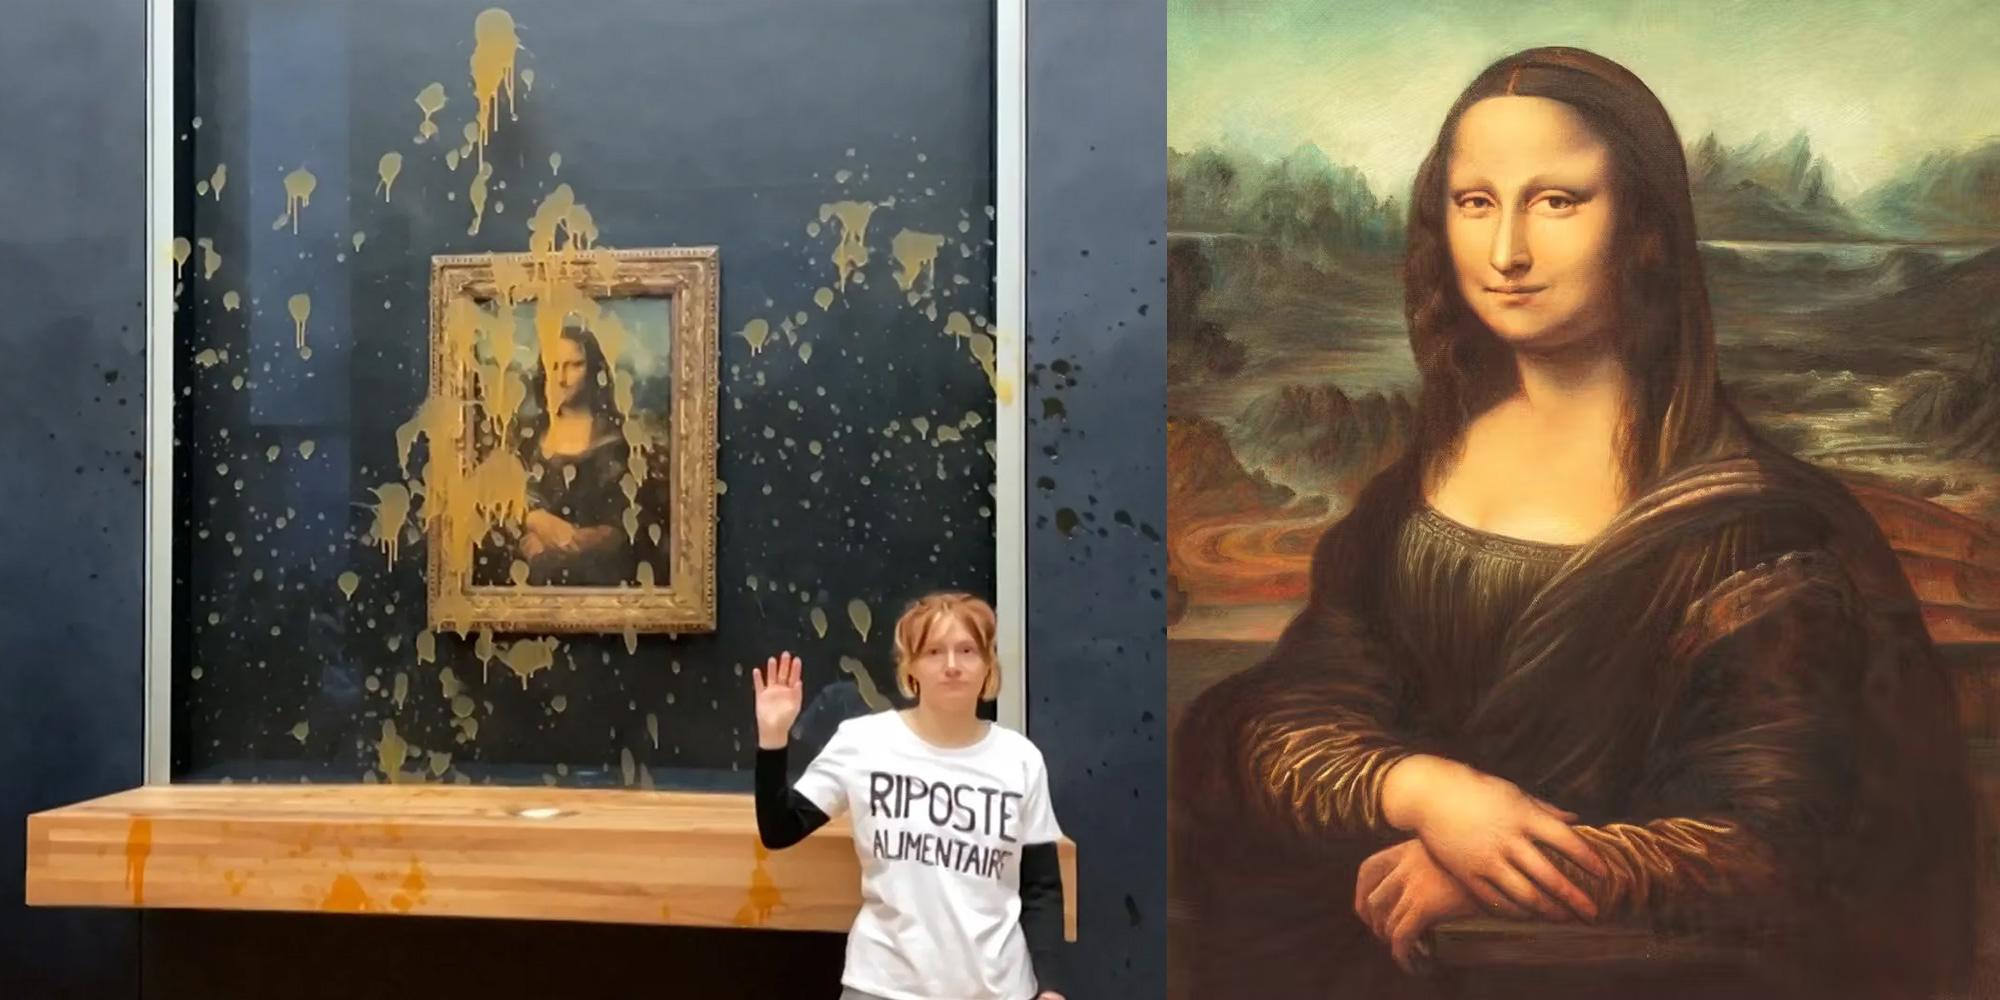 Environmental group Riposte Alimentaire threw soup at the glass-protected Mona Lisa